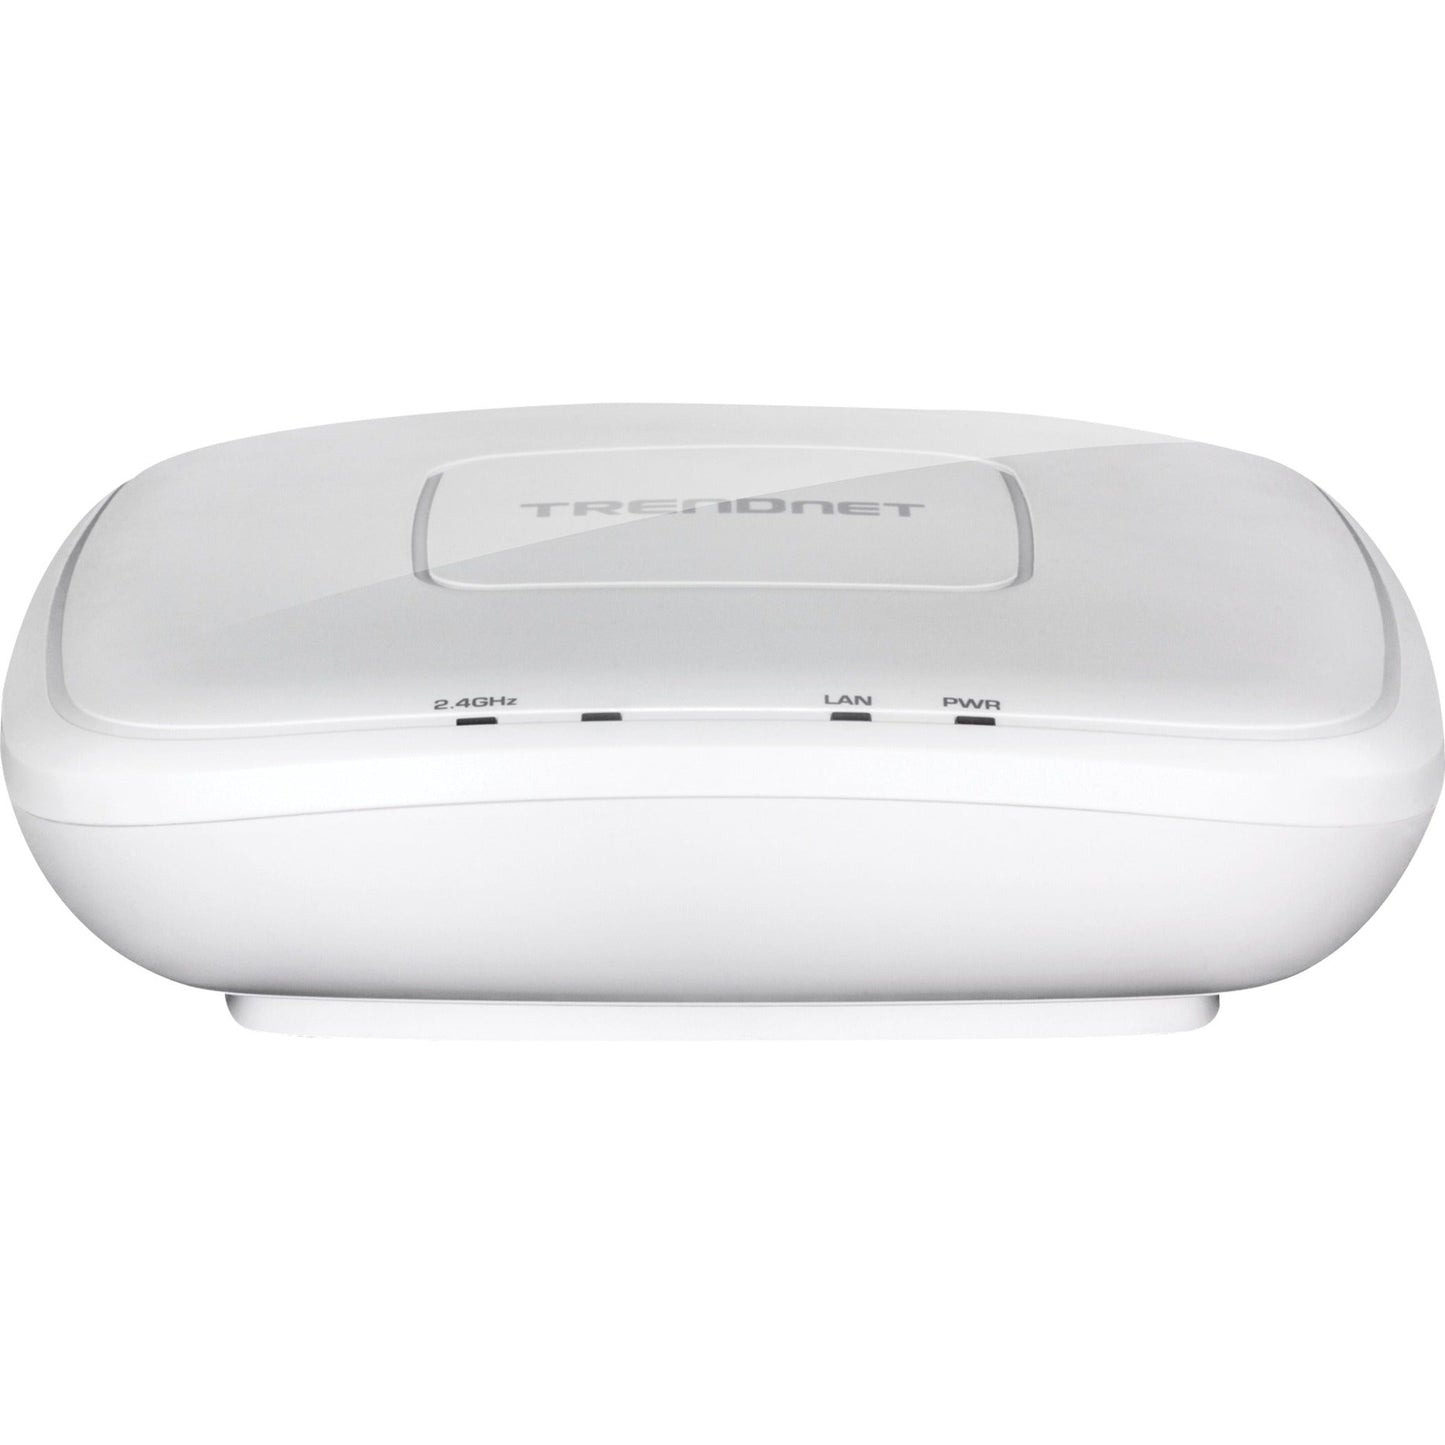 TRENDnet N300 Wireless PoE Access Point with Software Controller; Gigabit; AP; Client; 802.3af; TEW-755AP